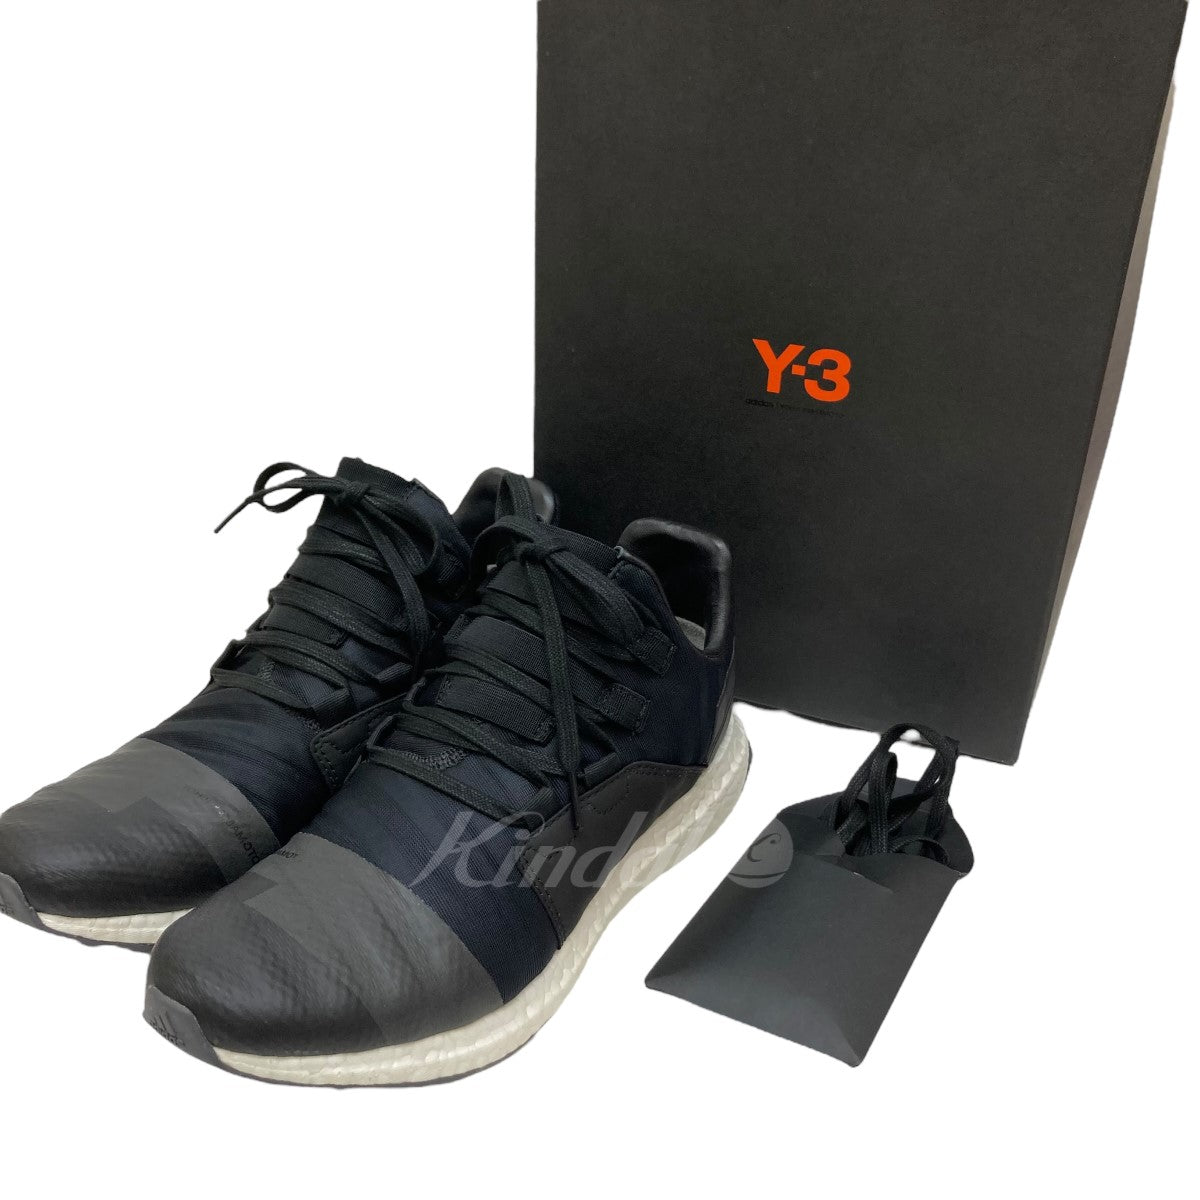 Y-3(ワイスリー) KOZOKO LOW スニーカー BY2632 BY2632 ブラック ...